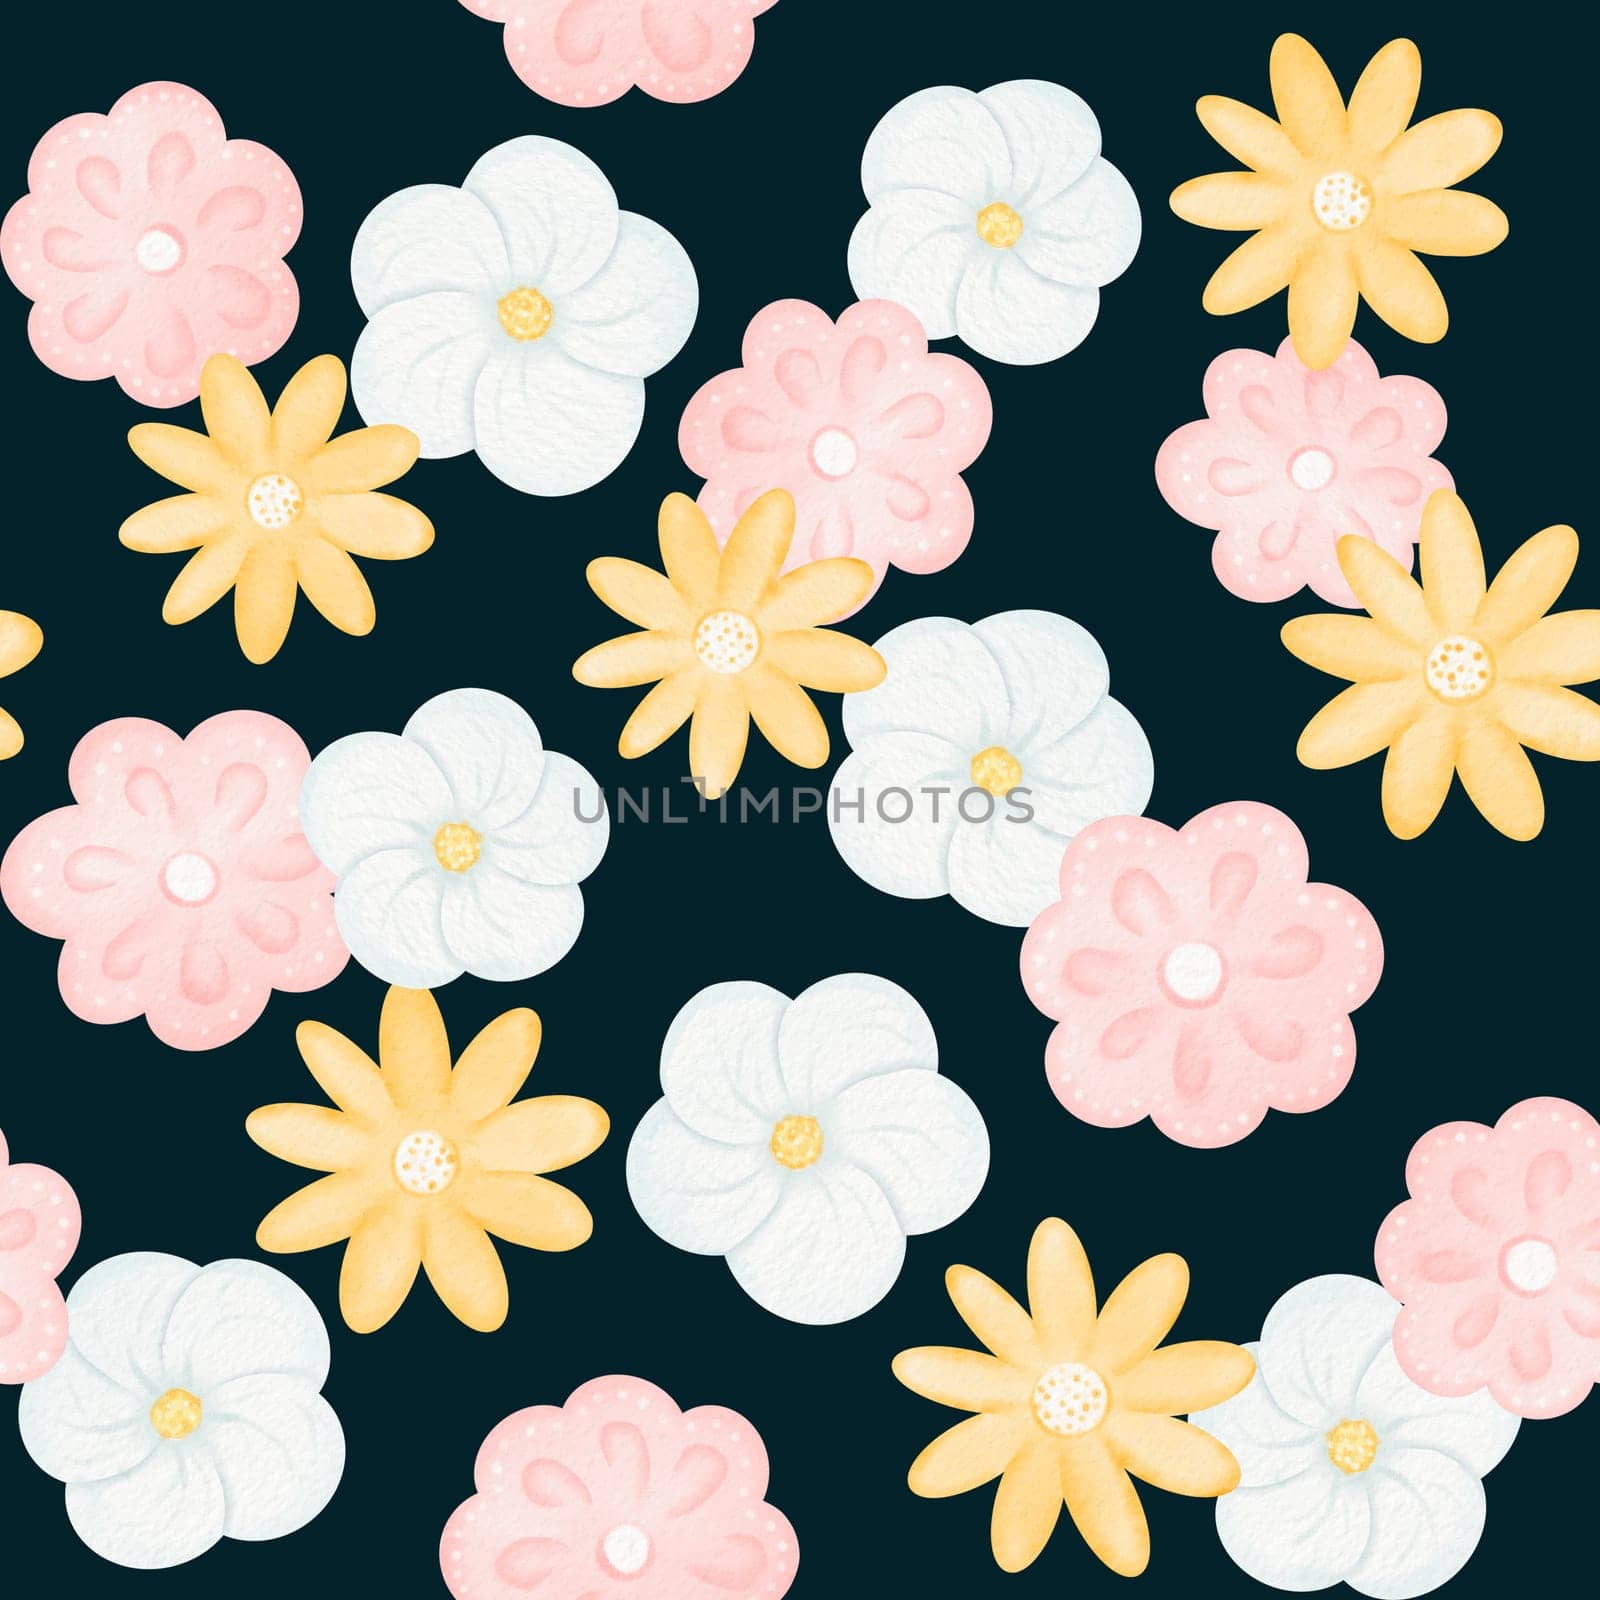 Seamless pattern of hand drawn doodle style cartoon decorative flowers. summer or spring themed for cards, greetings, invitations. Collection of ecology elements Digital watercolor hand-drawn style.